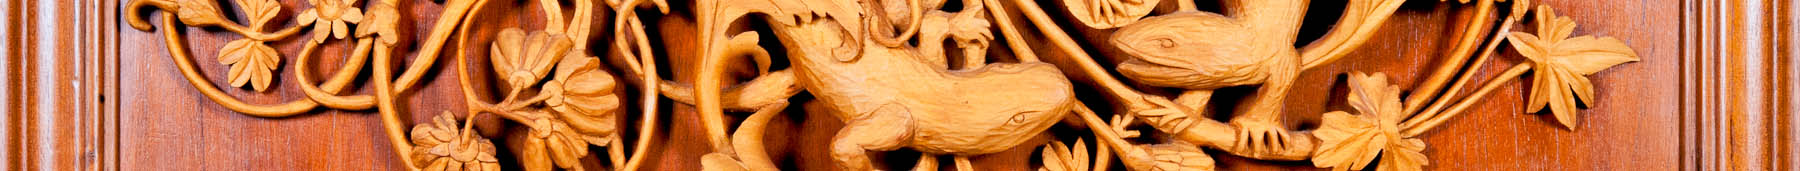 Logo for Bruce Weier Woodcraft - wood carving of lizards